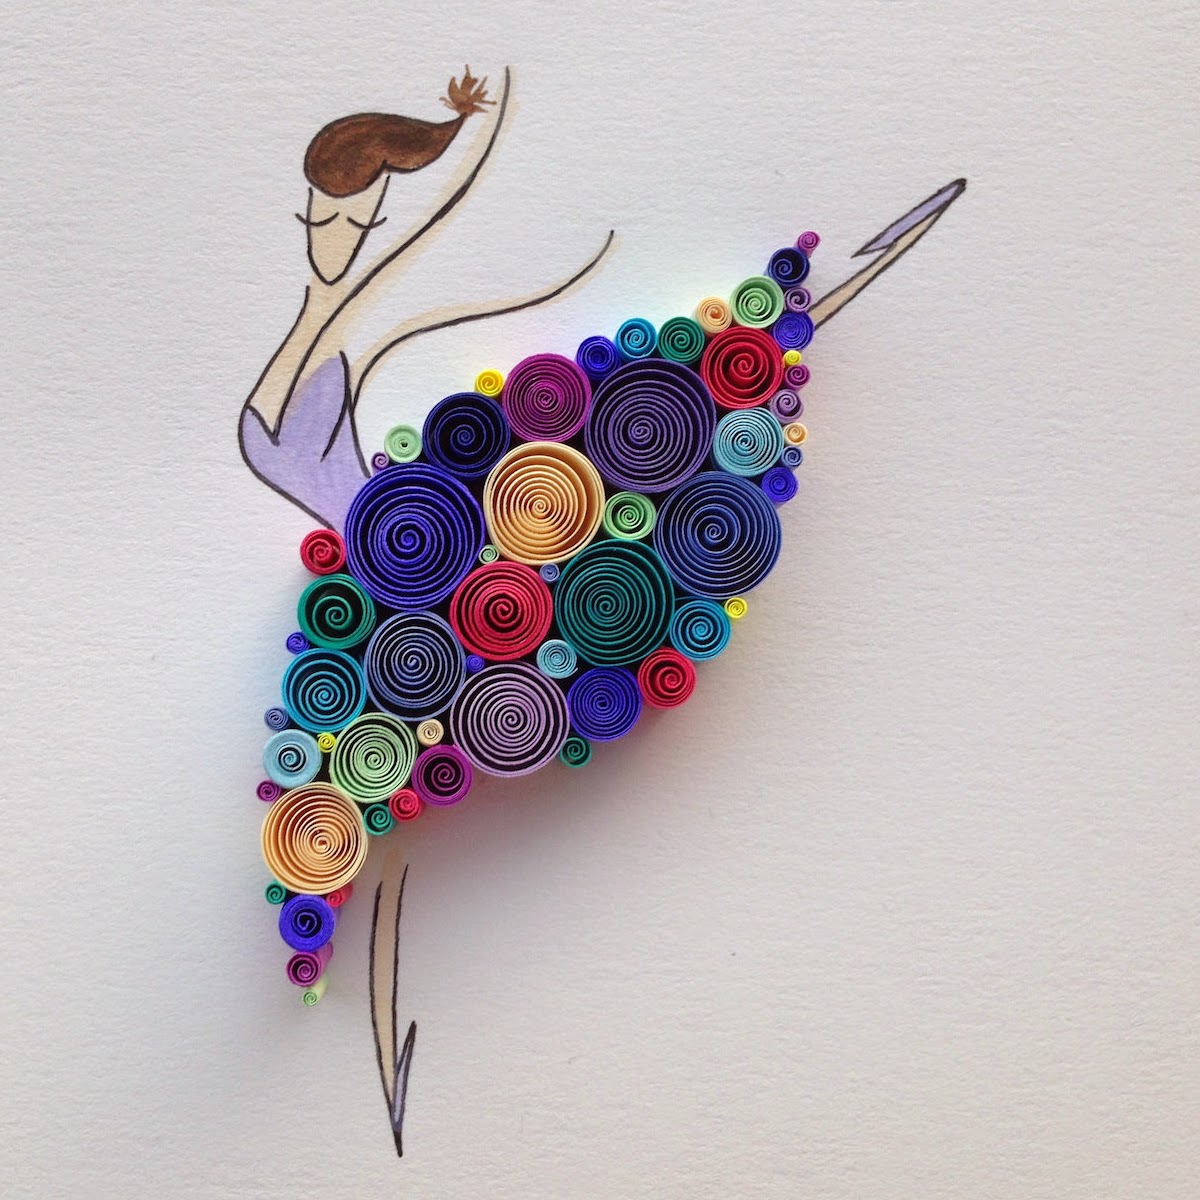 09-Dancing-Queen-Sena-Runa-Drawing-and-Quilling-a-match-made-in-Heaven-www-designstack-co